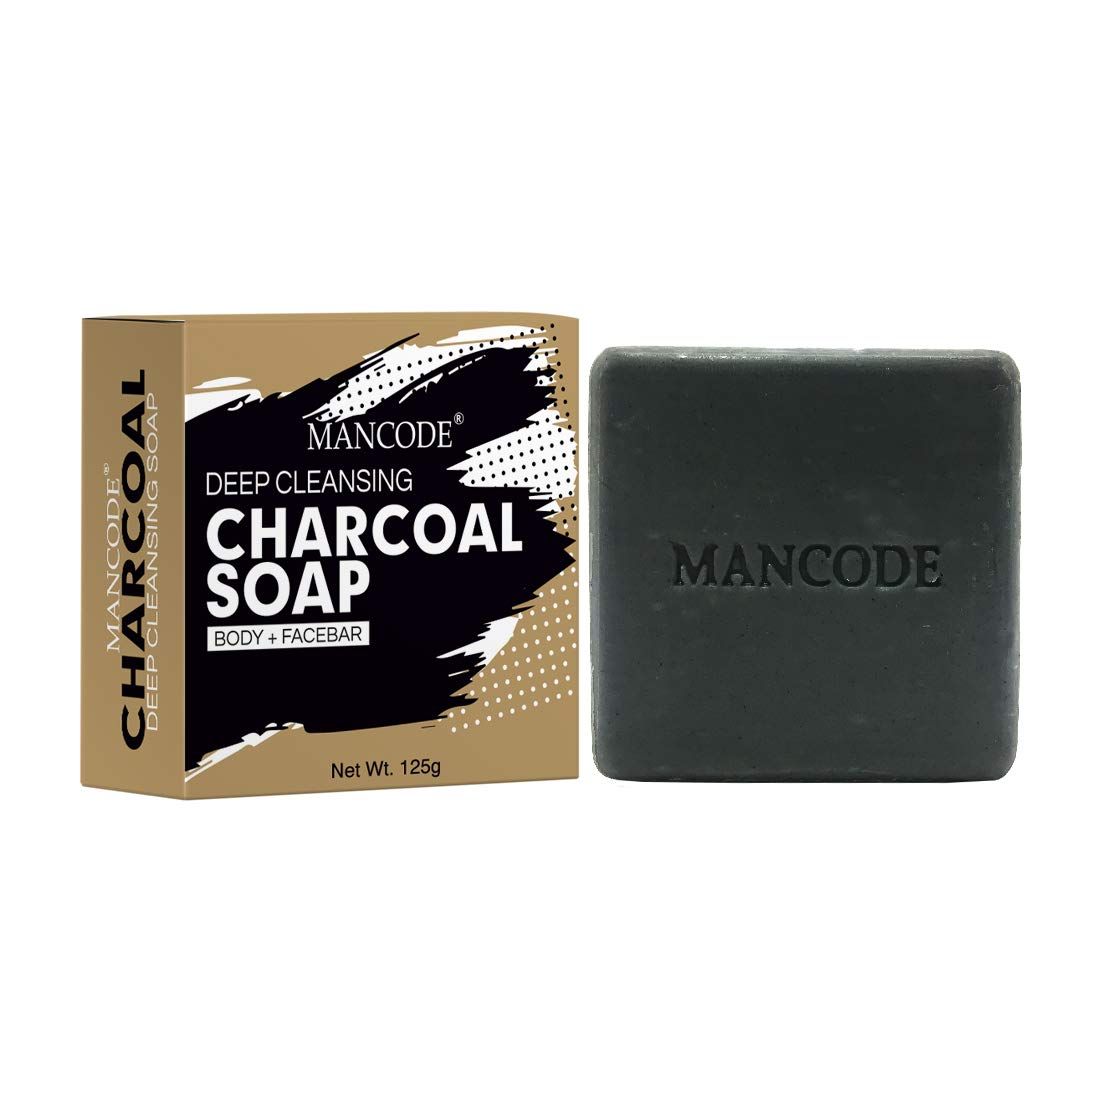 Mancode Charcoal Deep Cleansing Soap